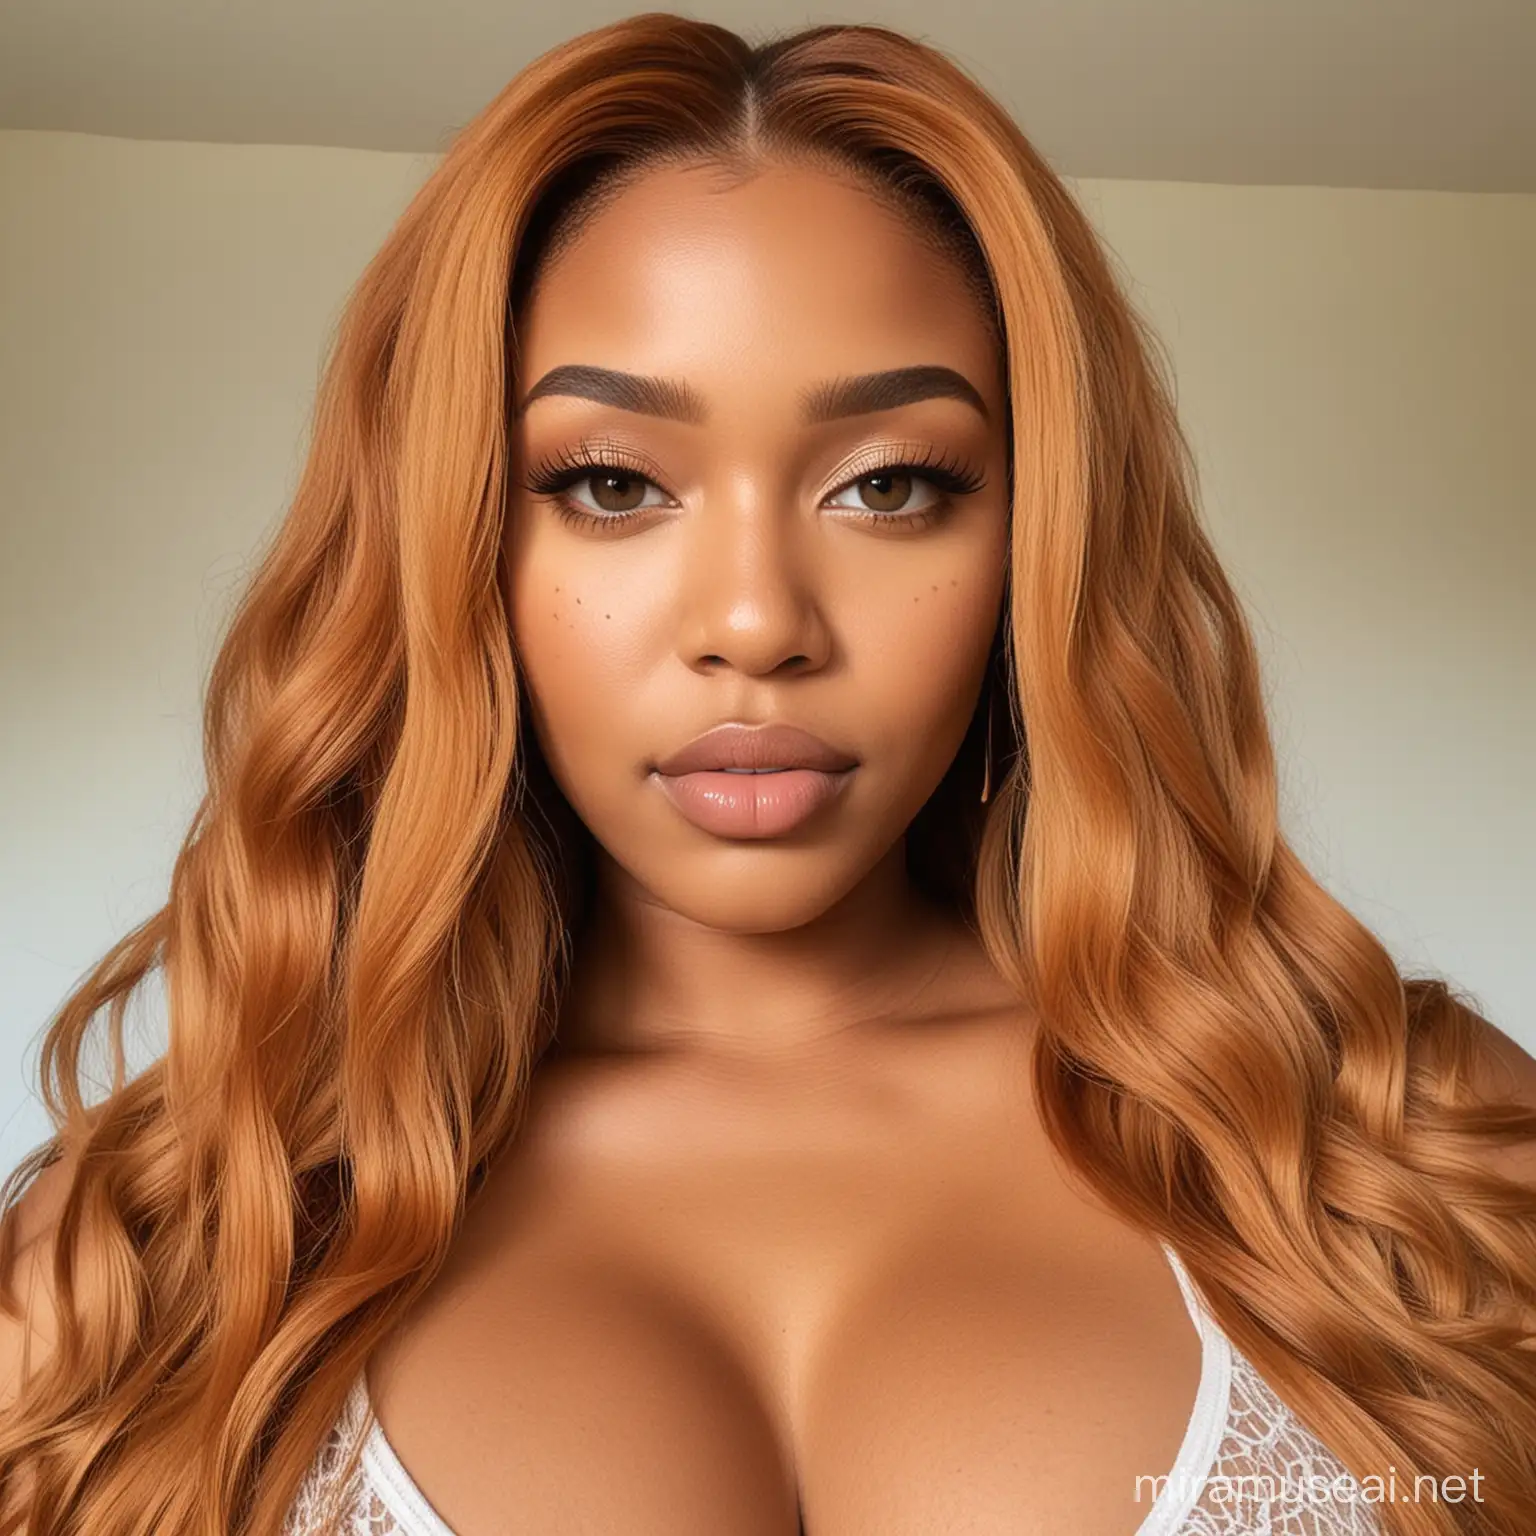 Image prompt/: generate pictures full body (face and body) of a light skinned south african very curvaceous, thick girl that looks like me, with a straight ginger hd lace front weave, thirst trap